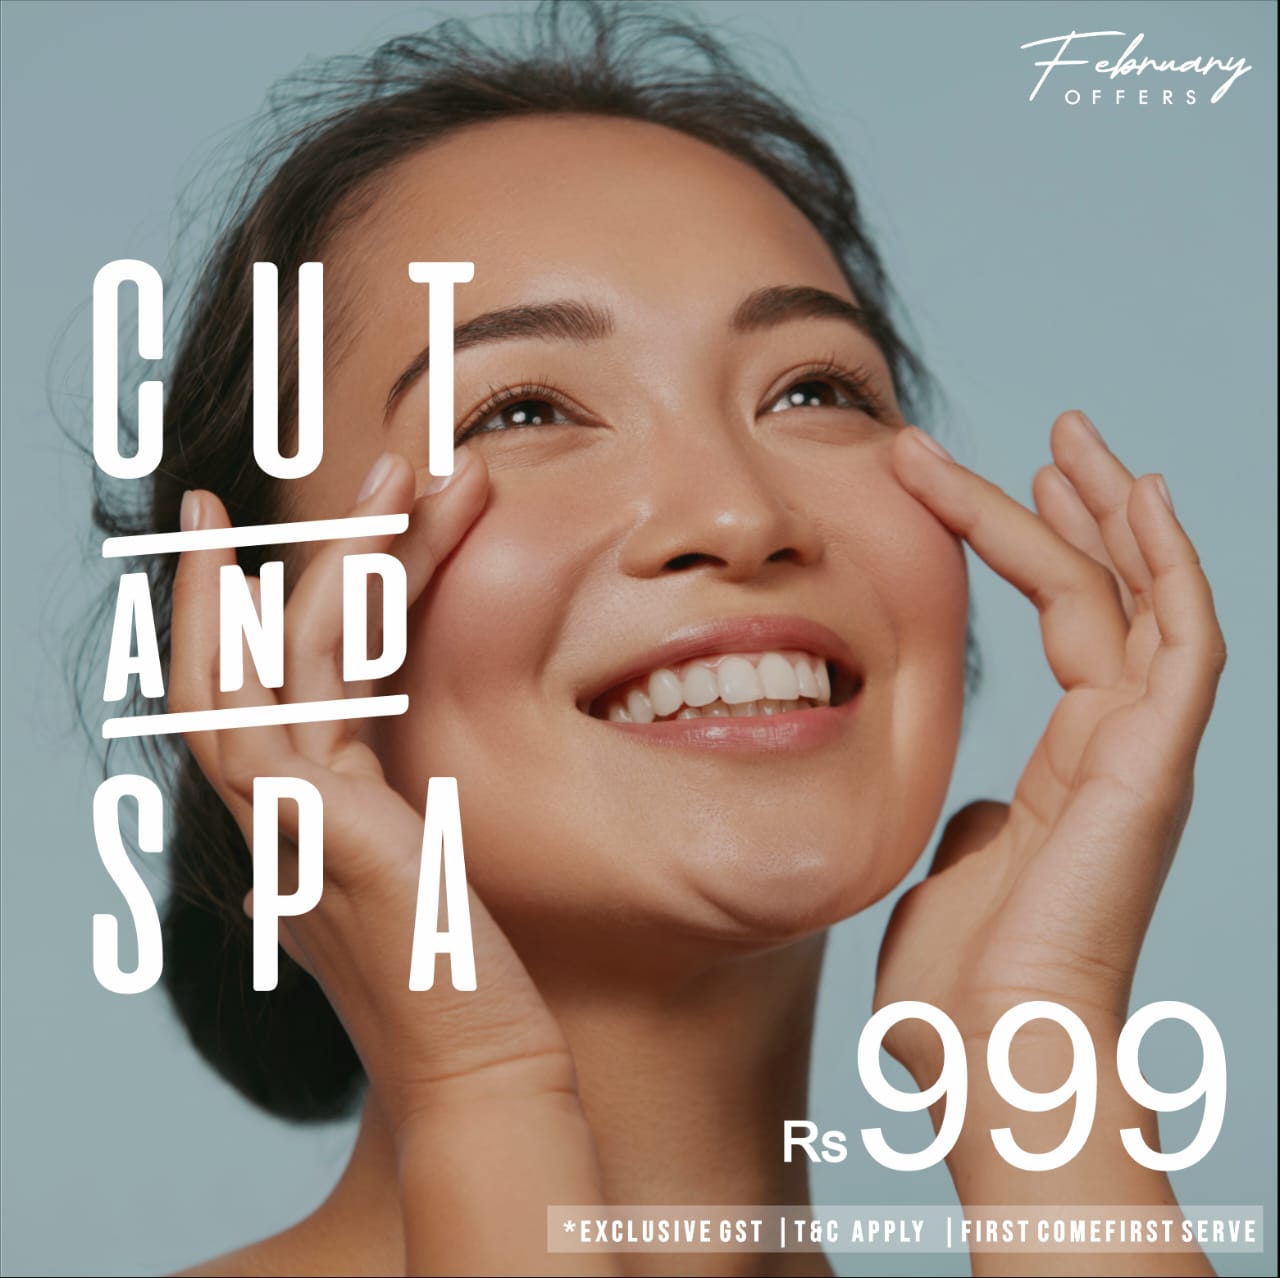 cut and spa